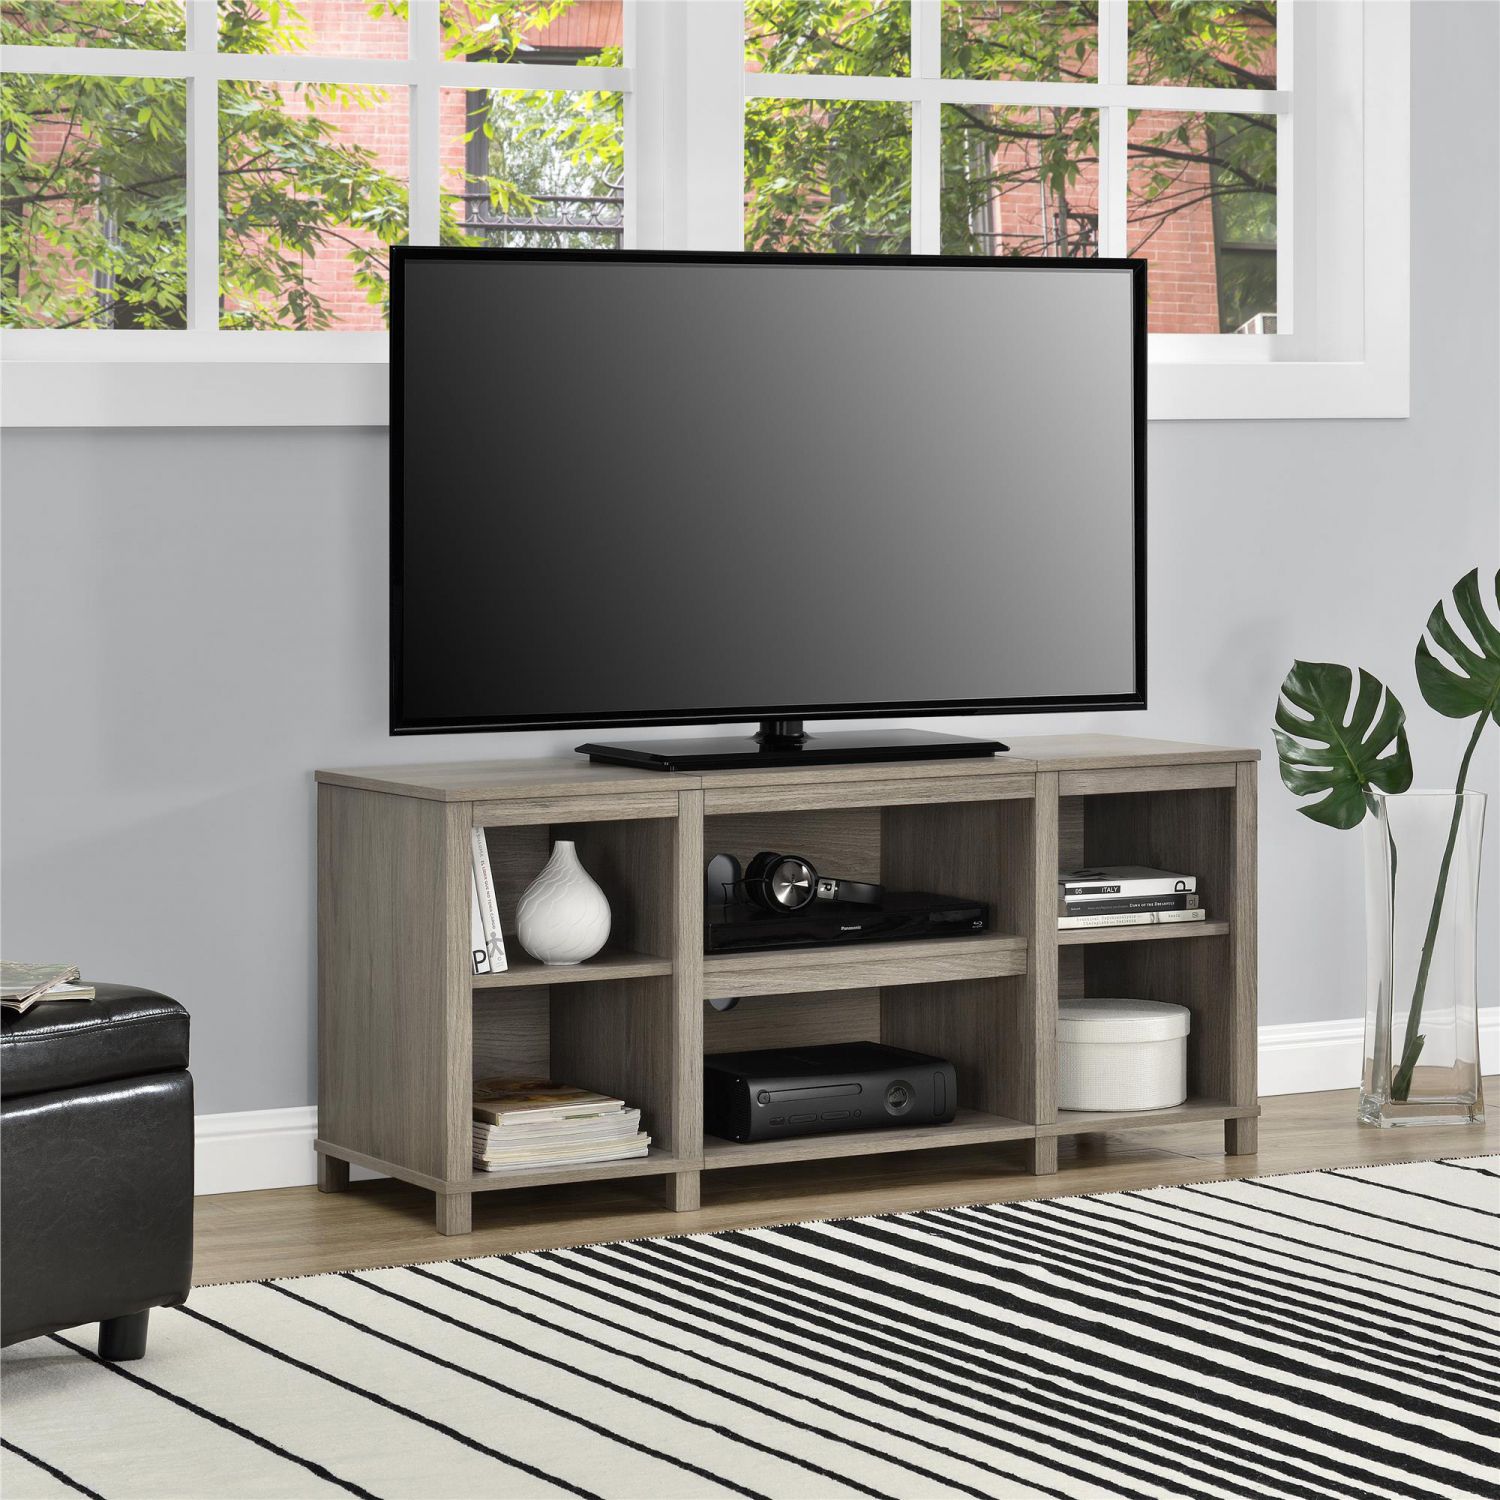 Entertainment Cubby Tv Stand, Up To 50 Inch Tv, Light Oak Throughout Light Oak Tv Stands Flat Screen (View 6 of 15)